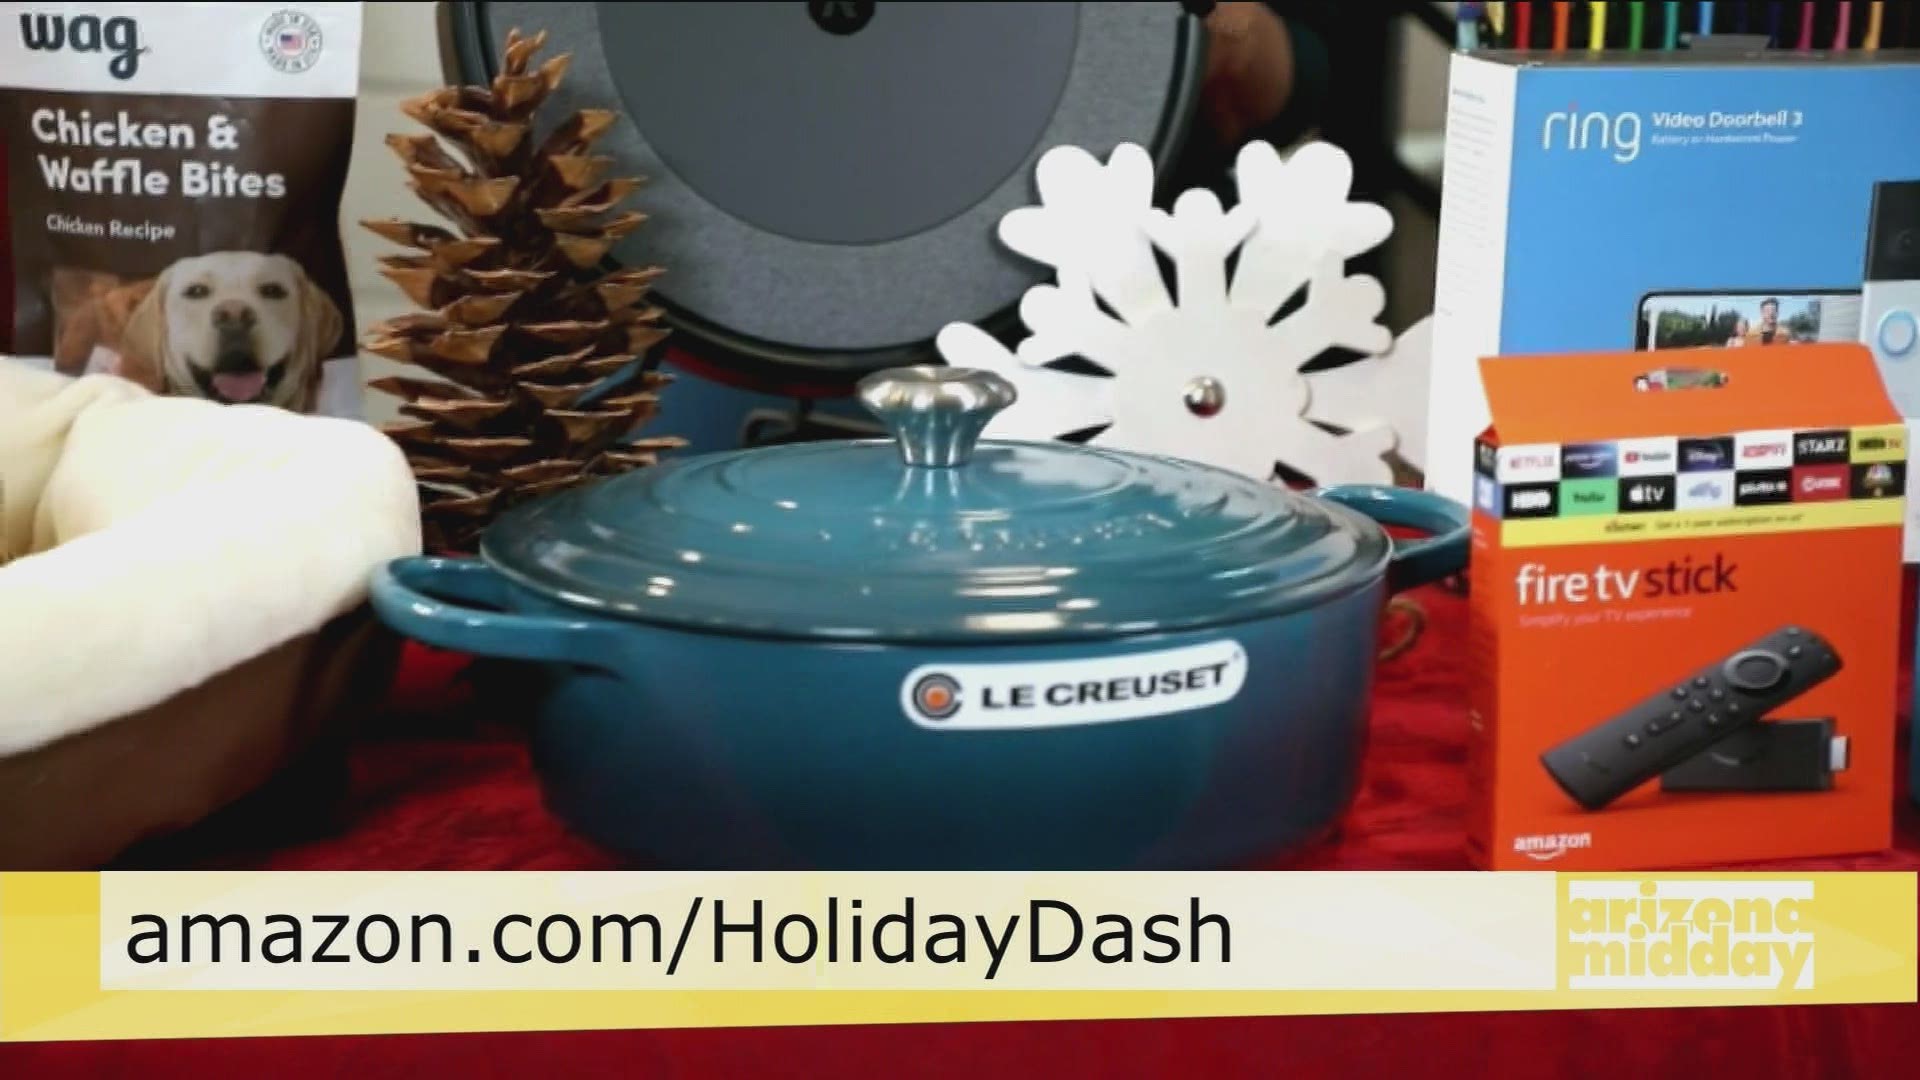 Lifestyle Expert, Amy Sewell, shows us some of her top holiday gift ideas from Amazon